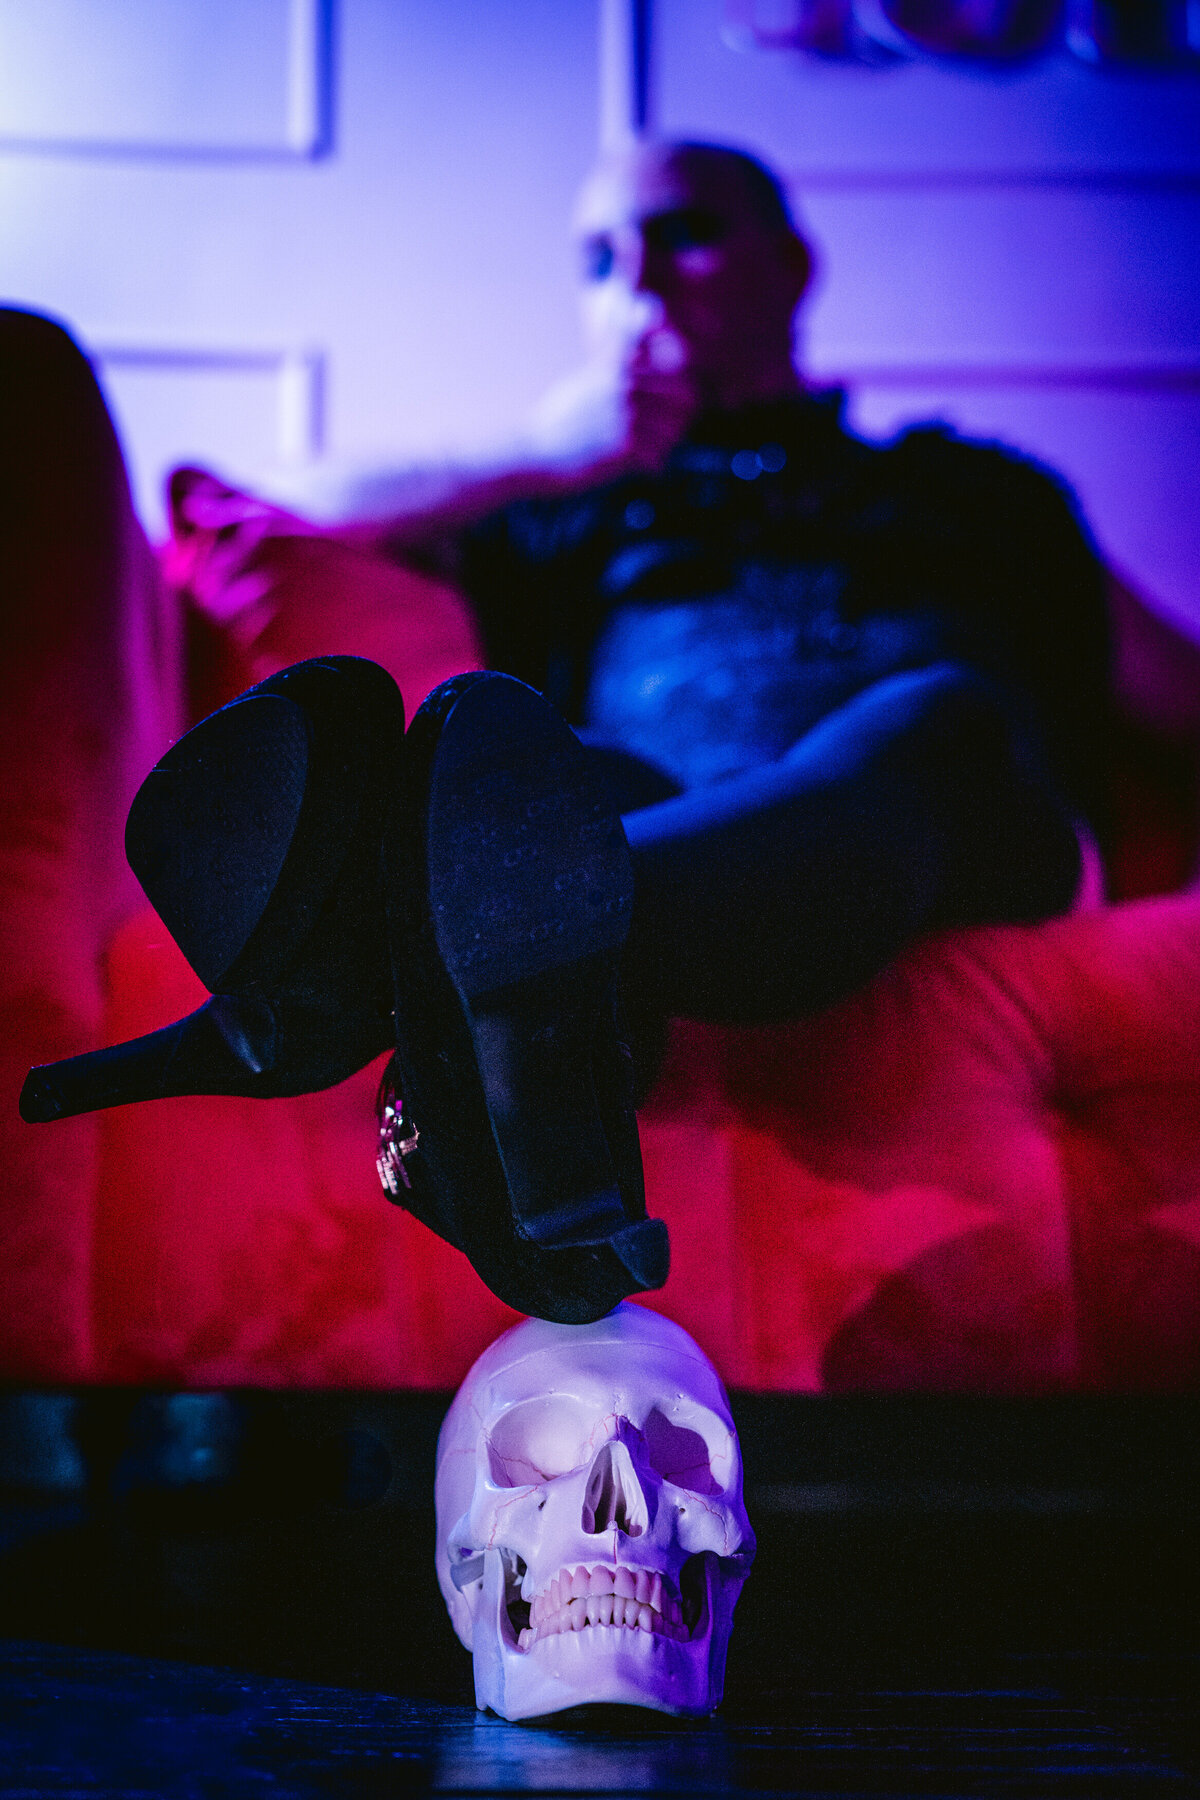 A person sitting on a couch resting their heels on a fake skull.